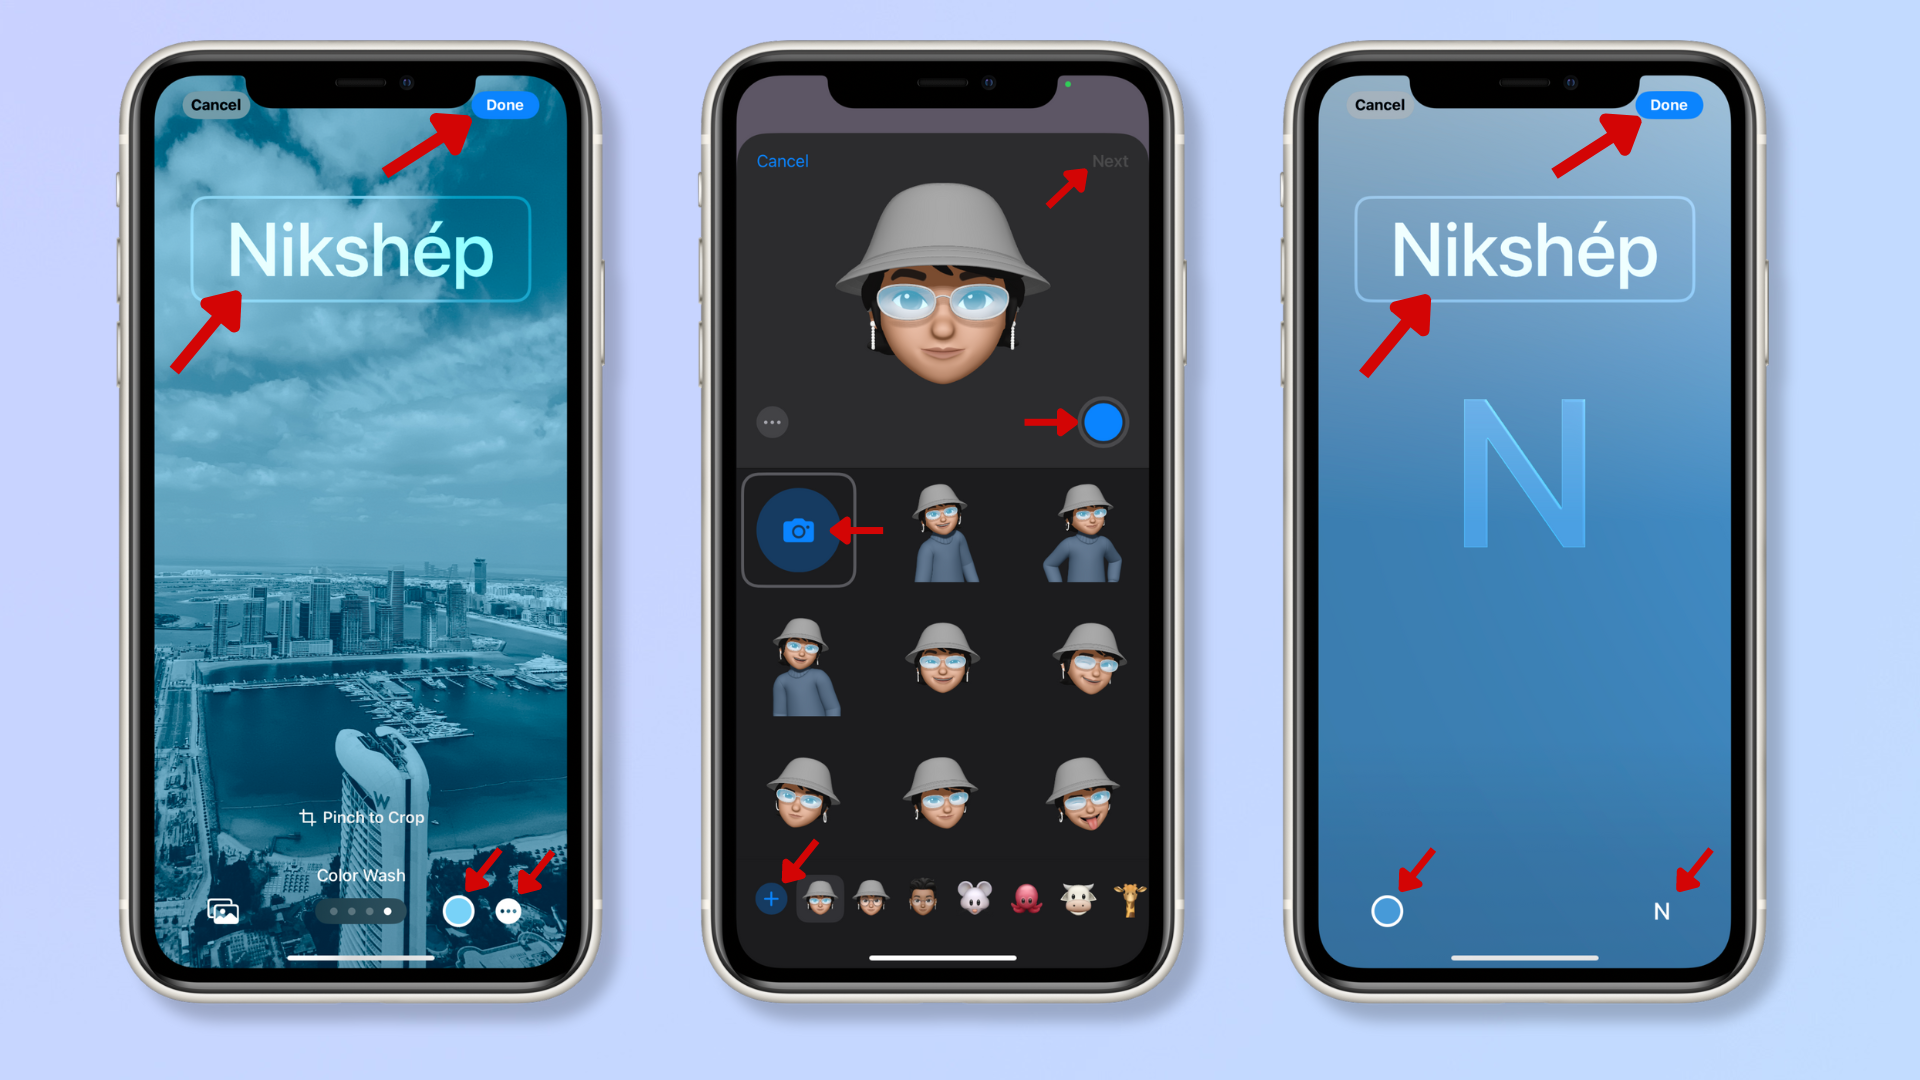 The first screenshot shows the Photo Poster, with red arrows pointing at the contact name, color icon, depth effect icon, and Done. The second screenshot shows the Memoji Poster creation menu, with red arrows pointing at a plus icon, camera icon, blue shutter icon, and Next. The third screenshot shows the Monogram Poster, with red arrows pointing at the contact name, color icon, monogram icon, and Done. 